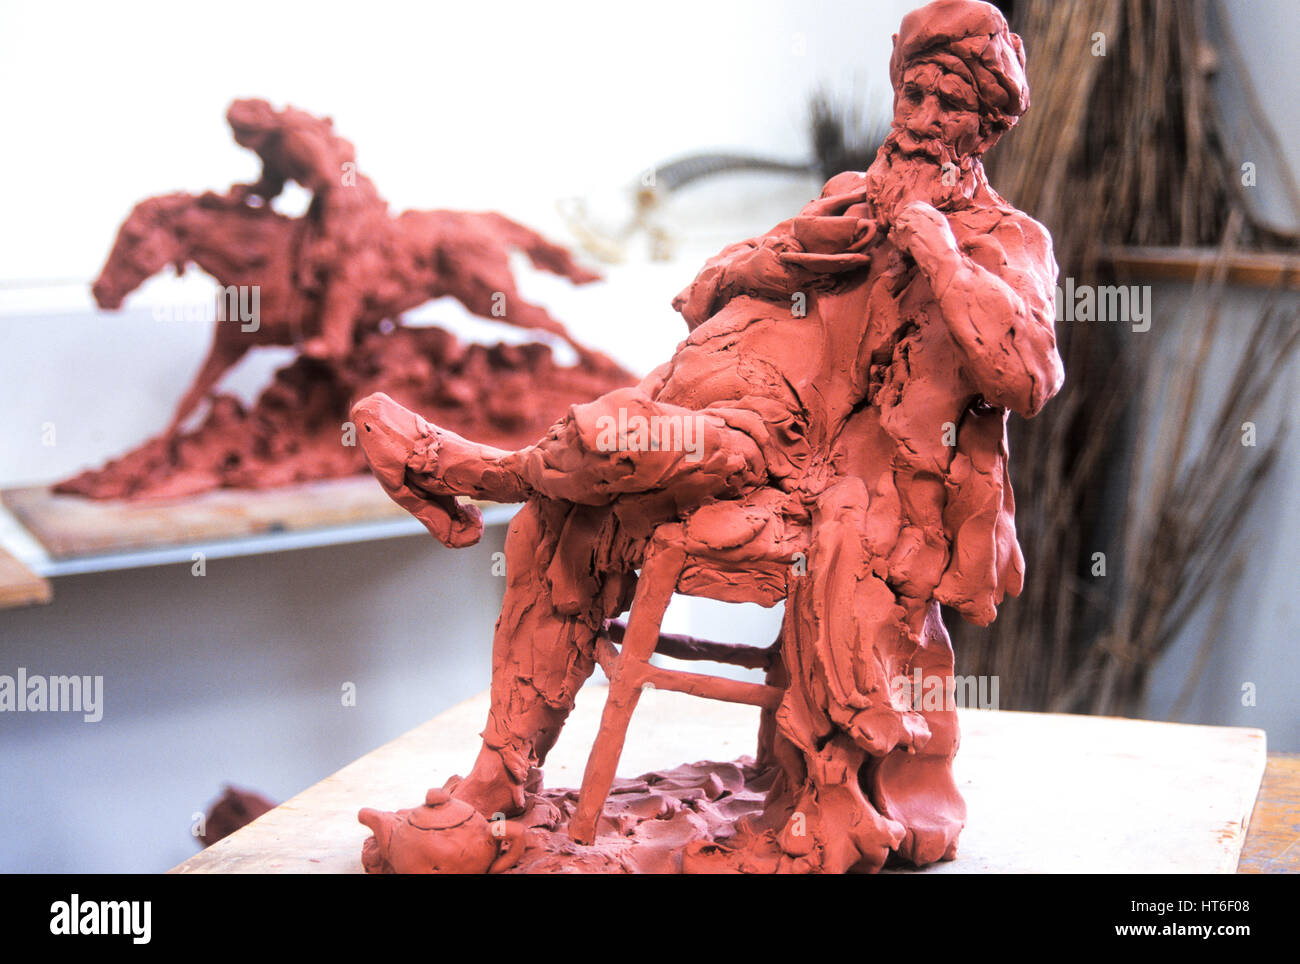 Clay sculpture of a man. Stock Photo